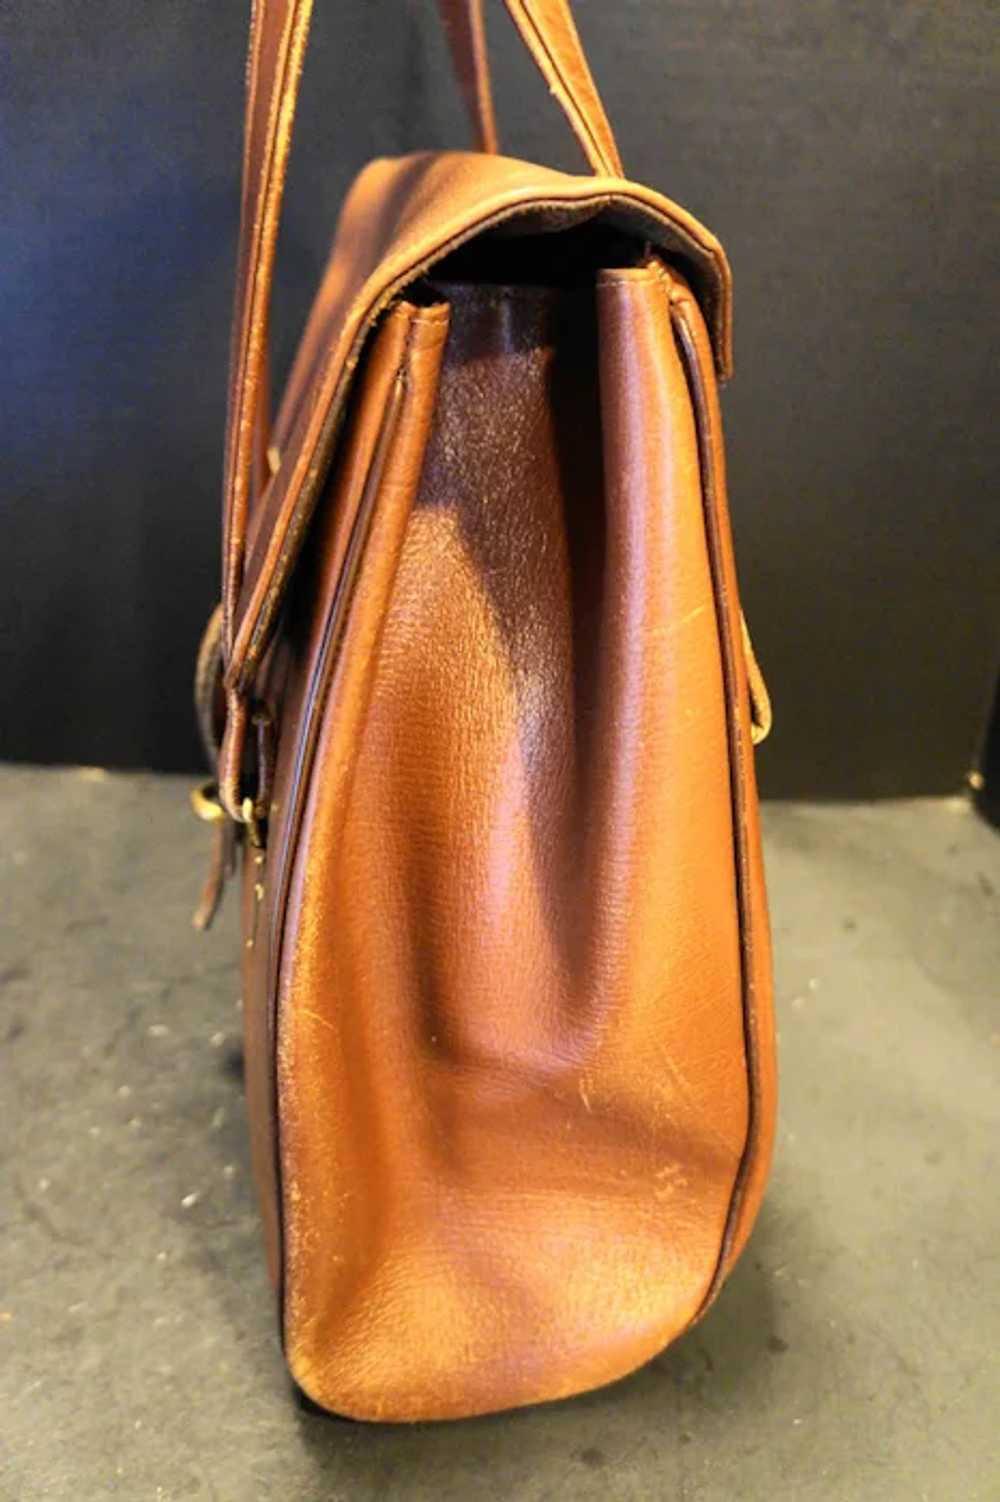 Rolfs Brown Leather Large Saddle Bag Style Purse - image 7